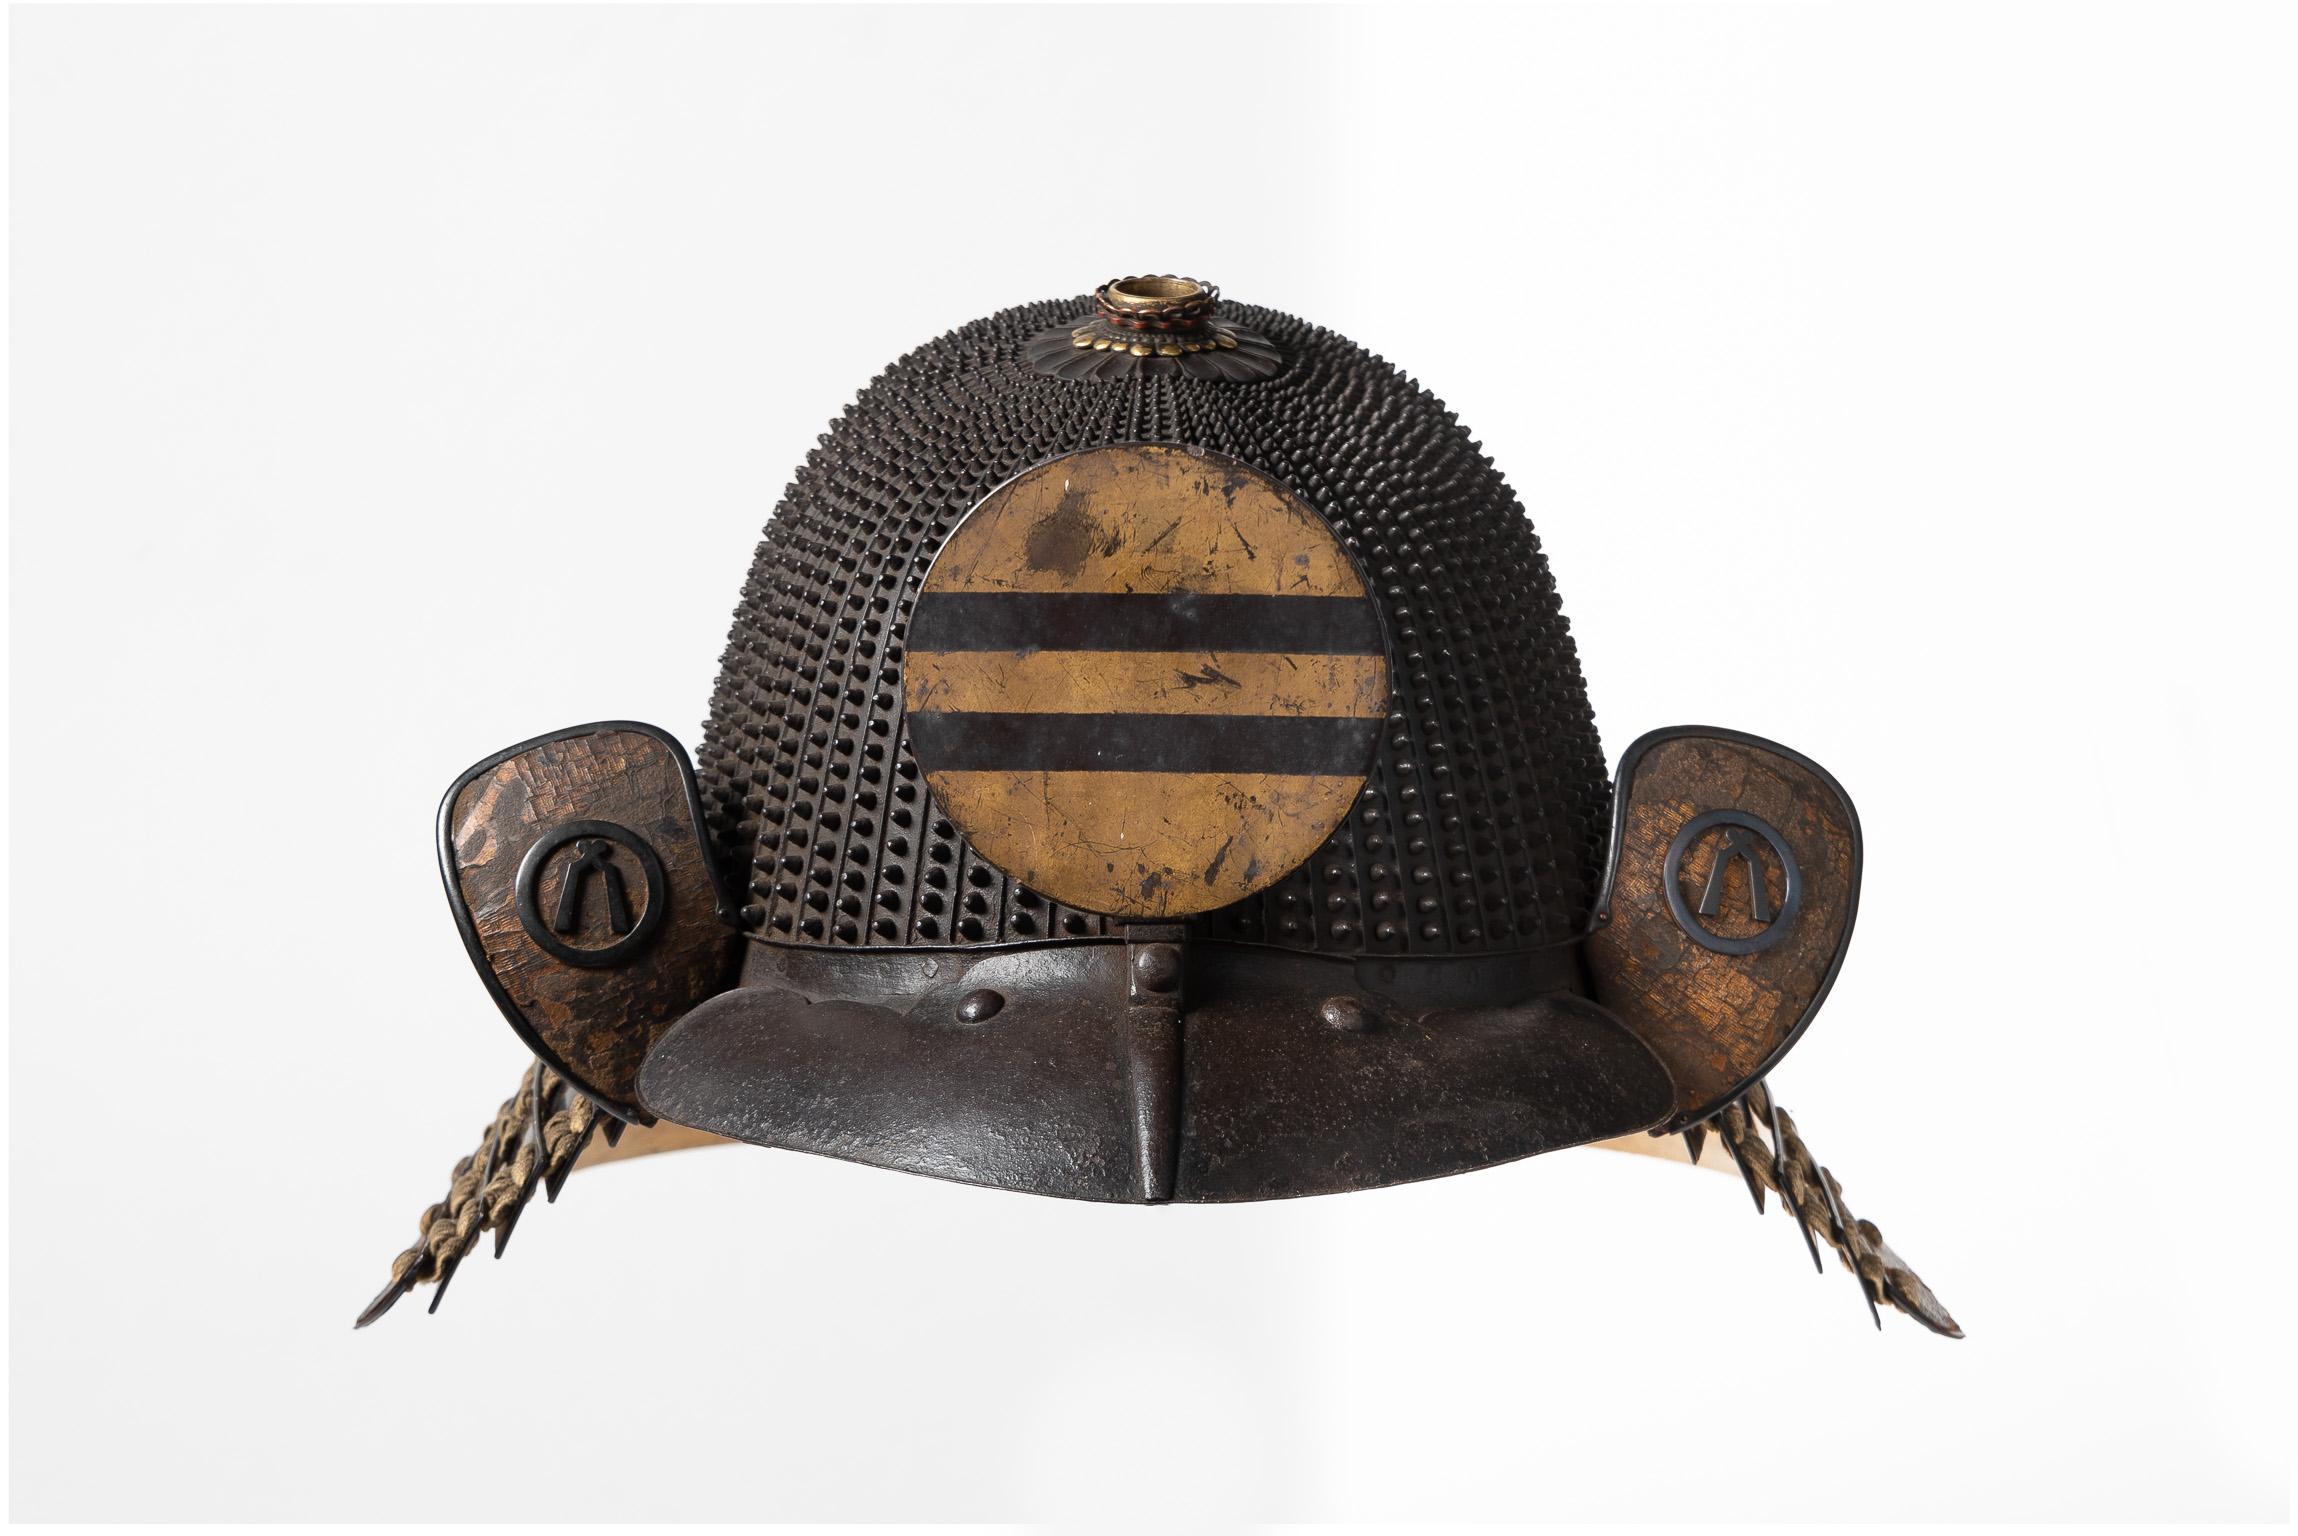 Koboshi kabuto signed Myochin Yoshiie
Samurai helmet with small standing rivets

Edo Period, 17th-18th century

A 62-plate koboshi-bachi of typical tenkokuzan form, with 30 pointed rivets on each plate decreasing in size towards the top, with